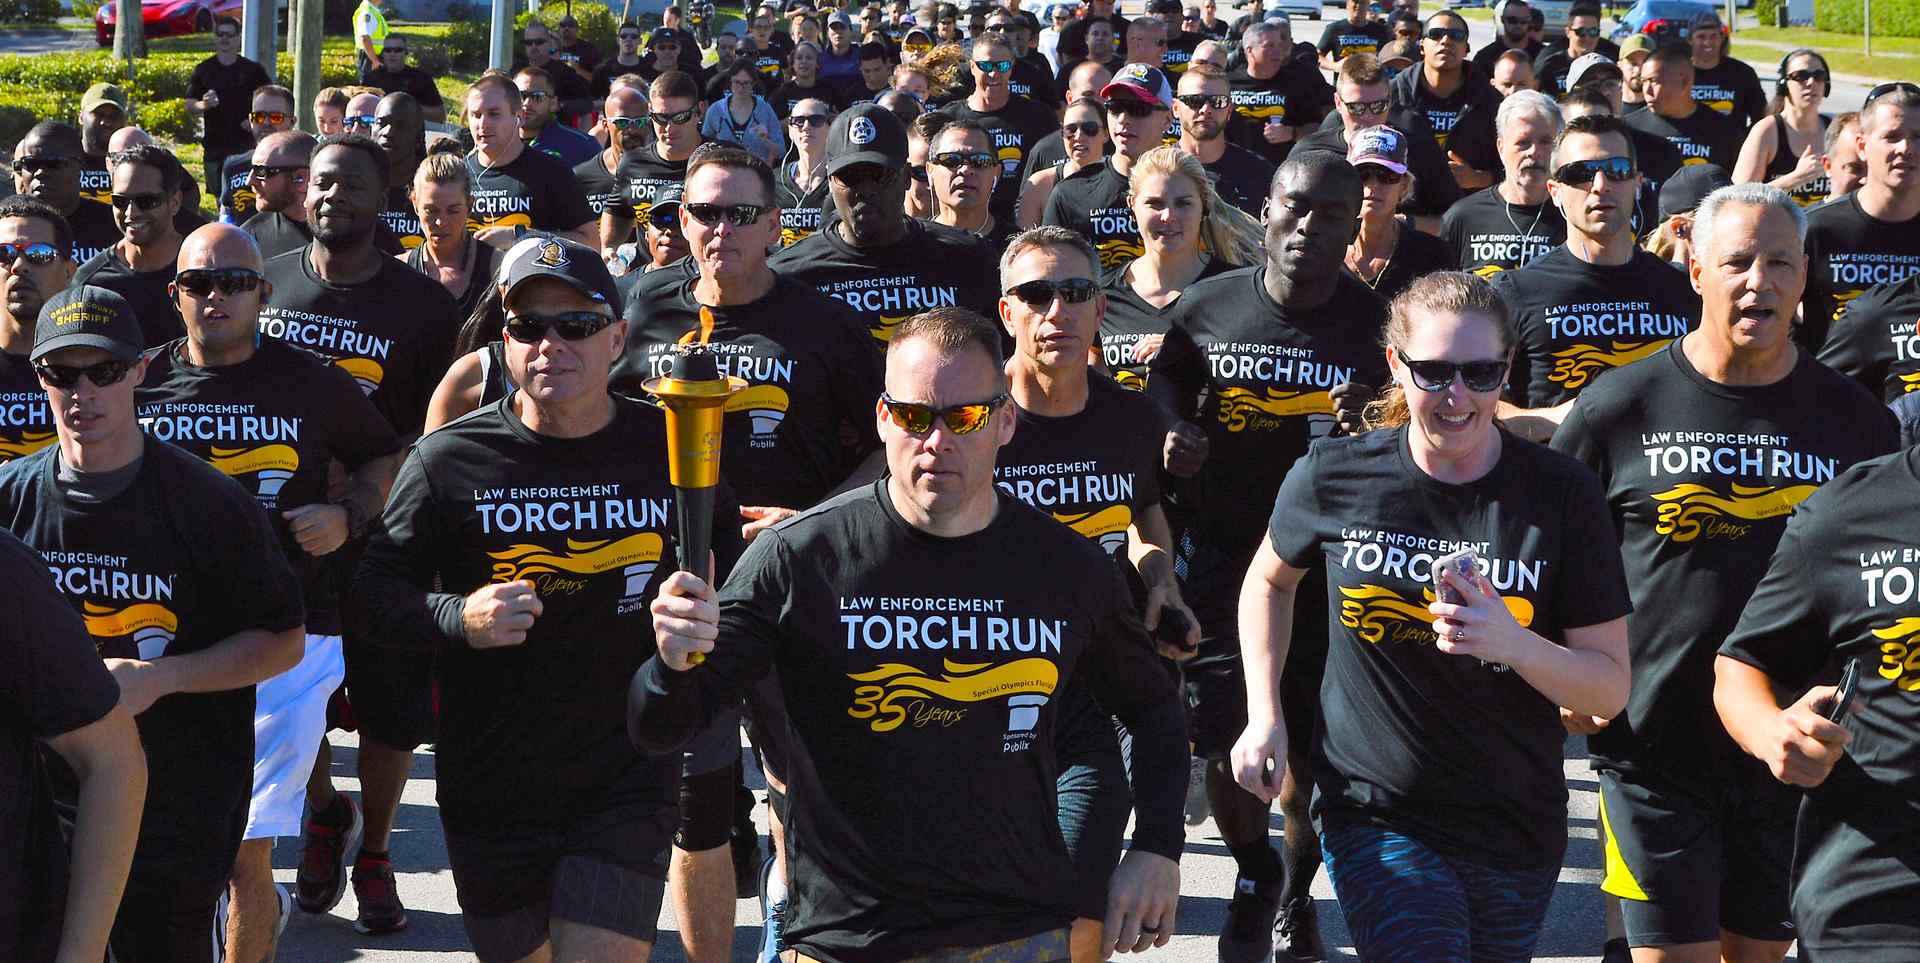 Torch Run Routes